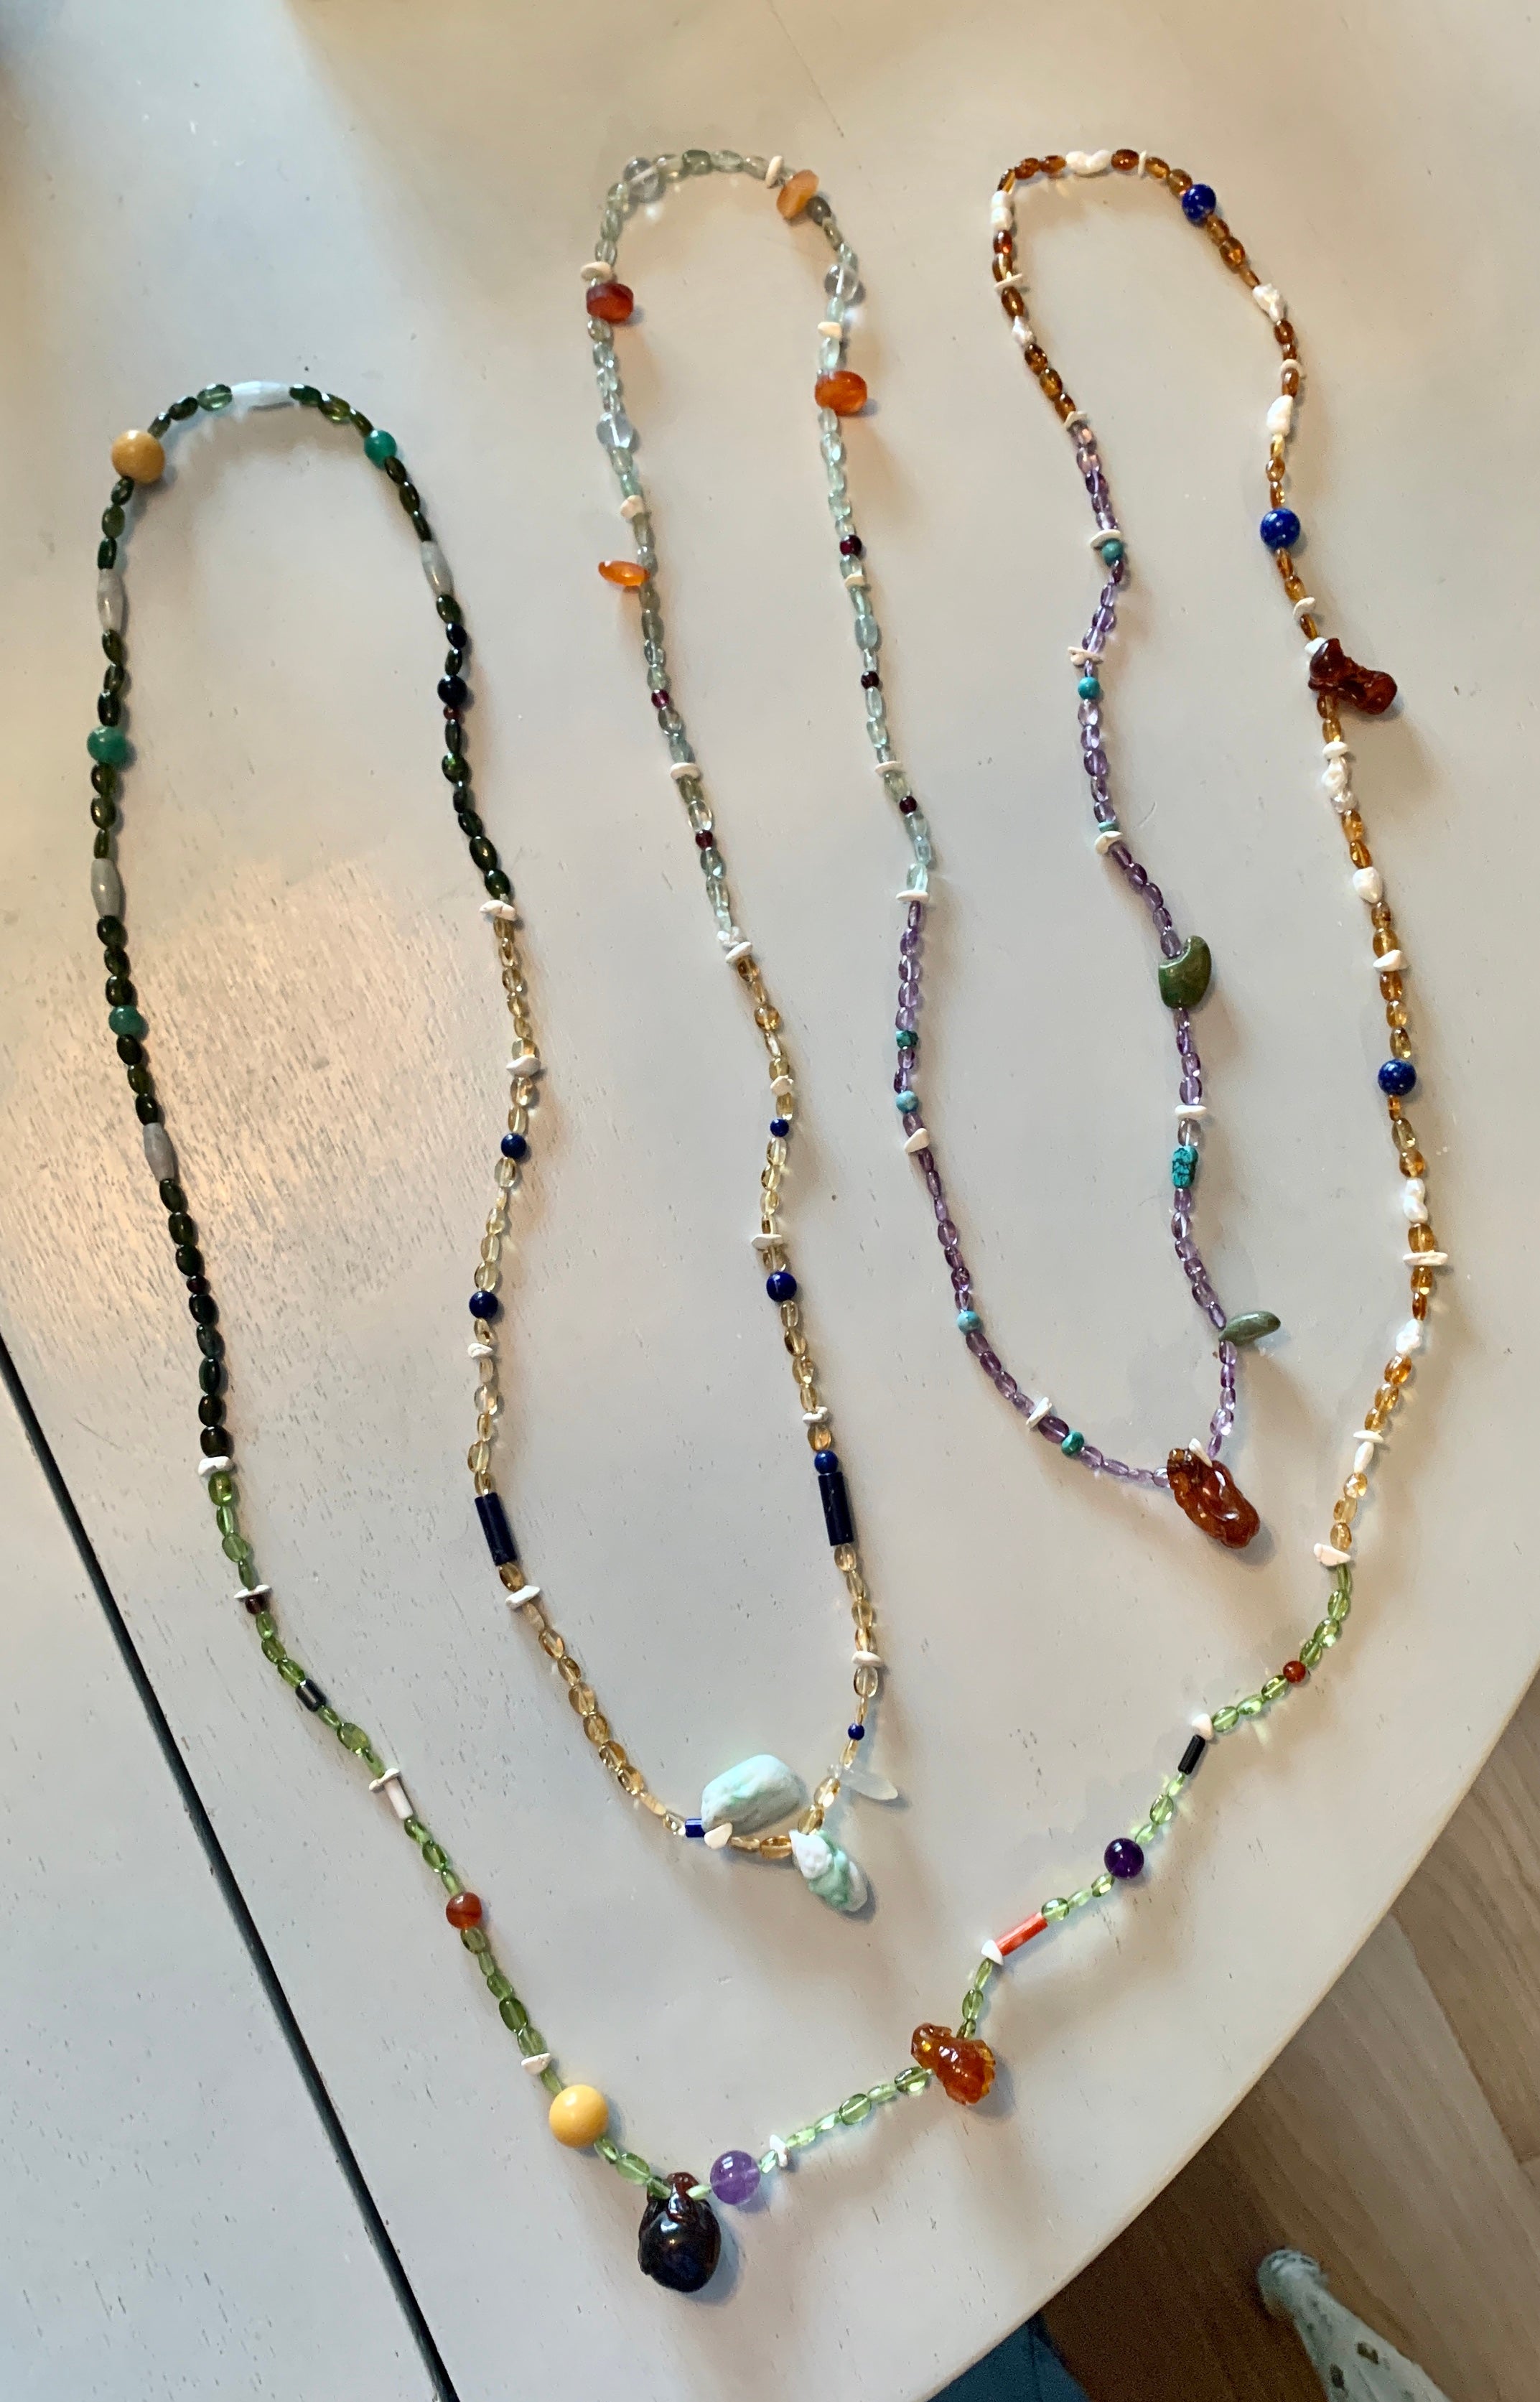 This is a stunning 10 Feet Long Multi Gem Necklace with carved charms in Jade and Amber in the form of a Rabbit, Monkey, Koi Fish, Fruit, Old Man and others with Citrine, Coral, Peridot, Topaz, Amethyst and other gemstones.  The necklace is 10 feet